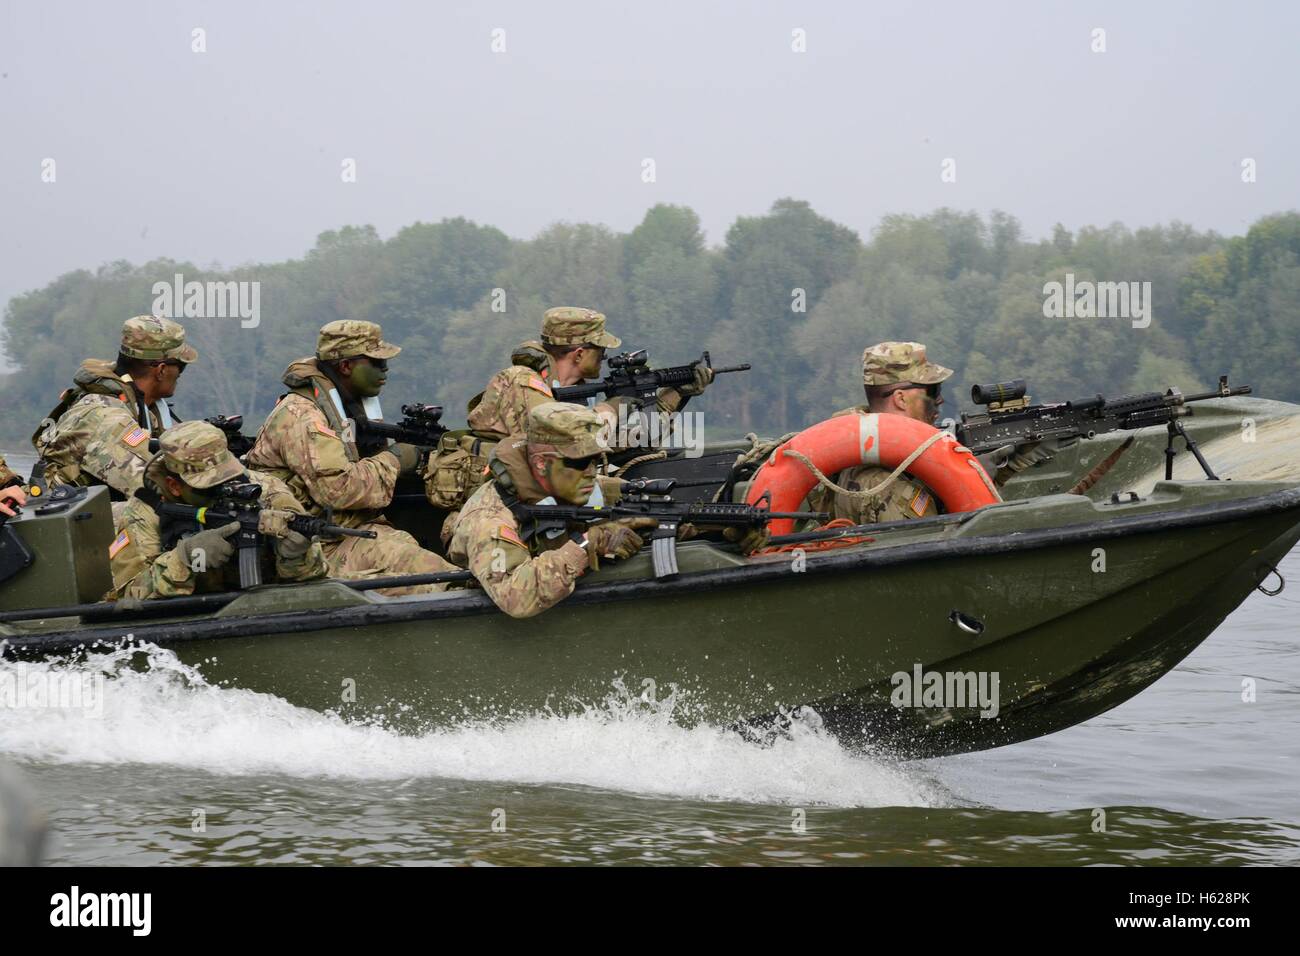 U.S. and Italian soldiers cross a river in a fast boat in combat position during a Livorno Shock training exercise October 17, 2016 in Piacenza, Italy. Stock Photo